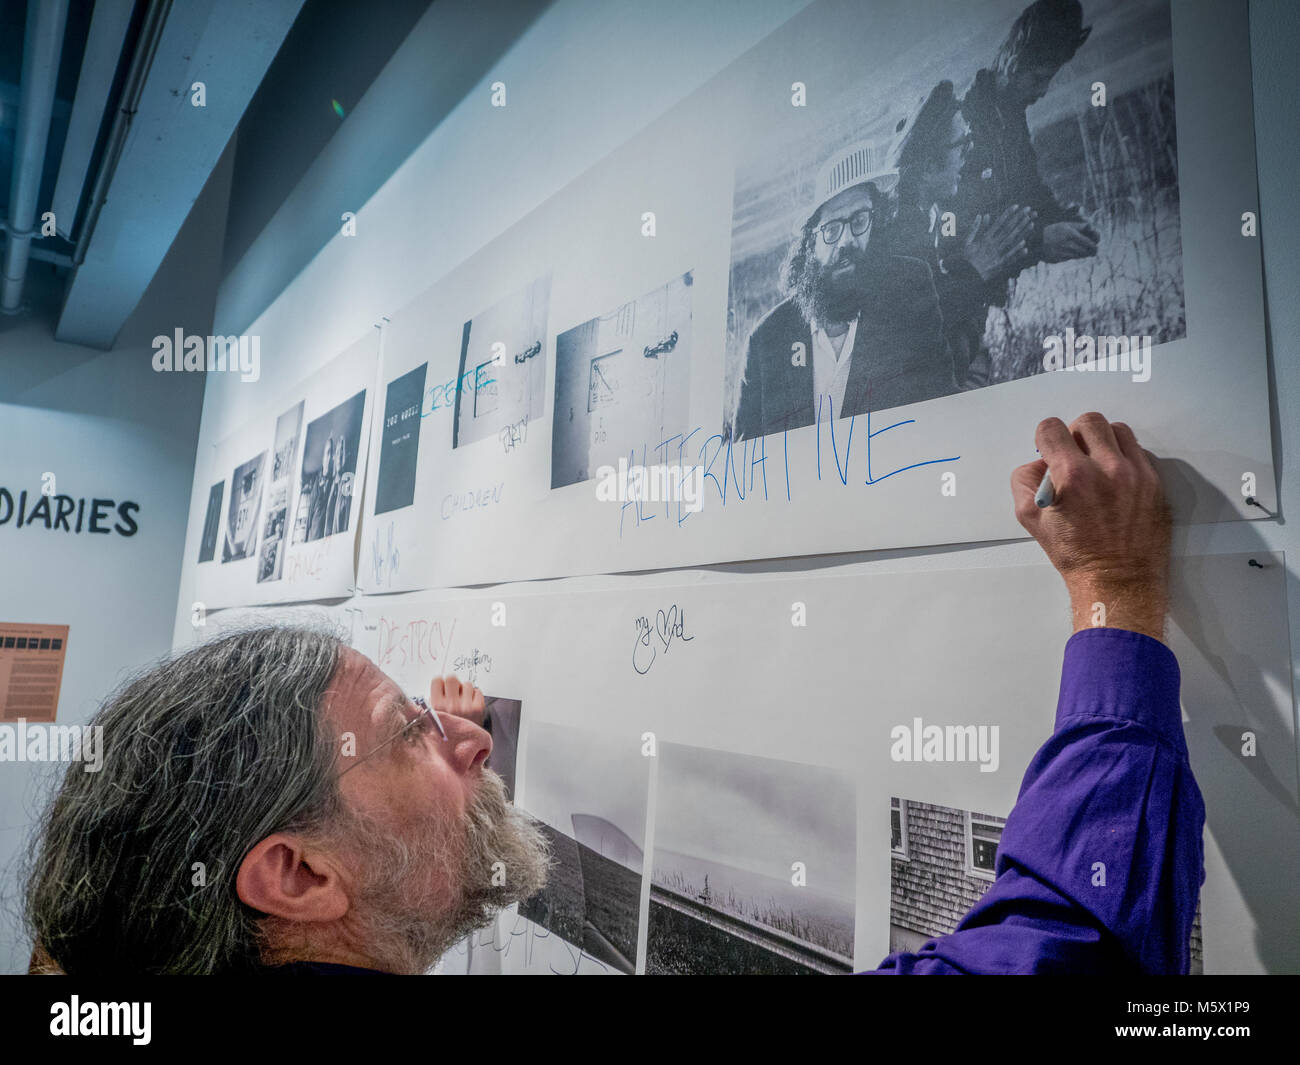 Portland, Oregon, USA. 26 FEB, 2018. Blue Sky Gallery co-founder Christopher Rauschenberg, son of the American painter Robert Rauschenberg, defaces a Robert Frank image of the poet Alan Ginsberg  at Blue Sky Gallery in Portland, Oregon, USA. The work was destroyed in a “Destruction Dance” performance defacing the photographs with ink and mutilation with scissors, knives and even ice skates  at the end of it’s run. The destruction was Frank's protest regarding today's greed in the global art market. Credit: Ken Hawkins/Alamy Live News Stock Photo